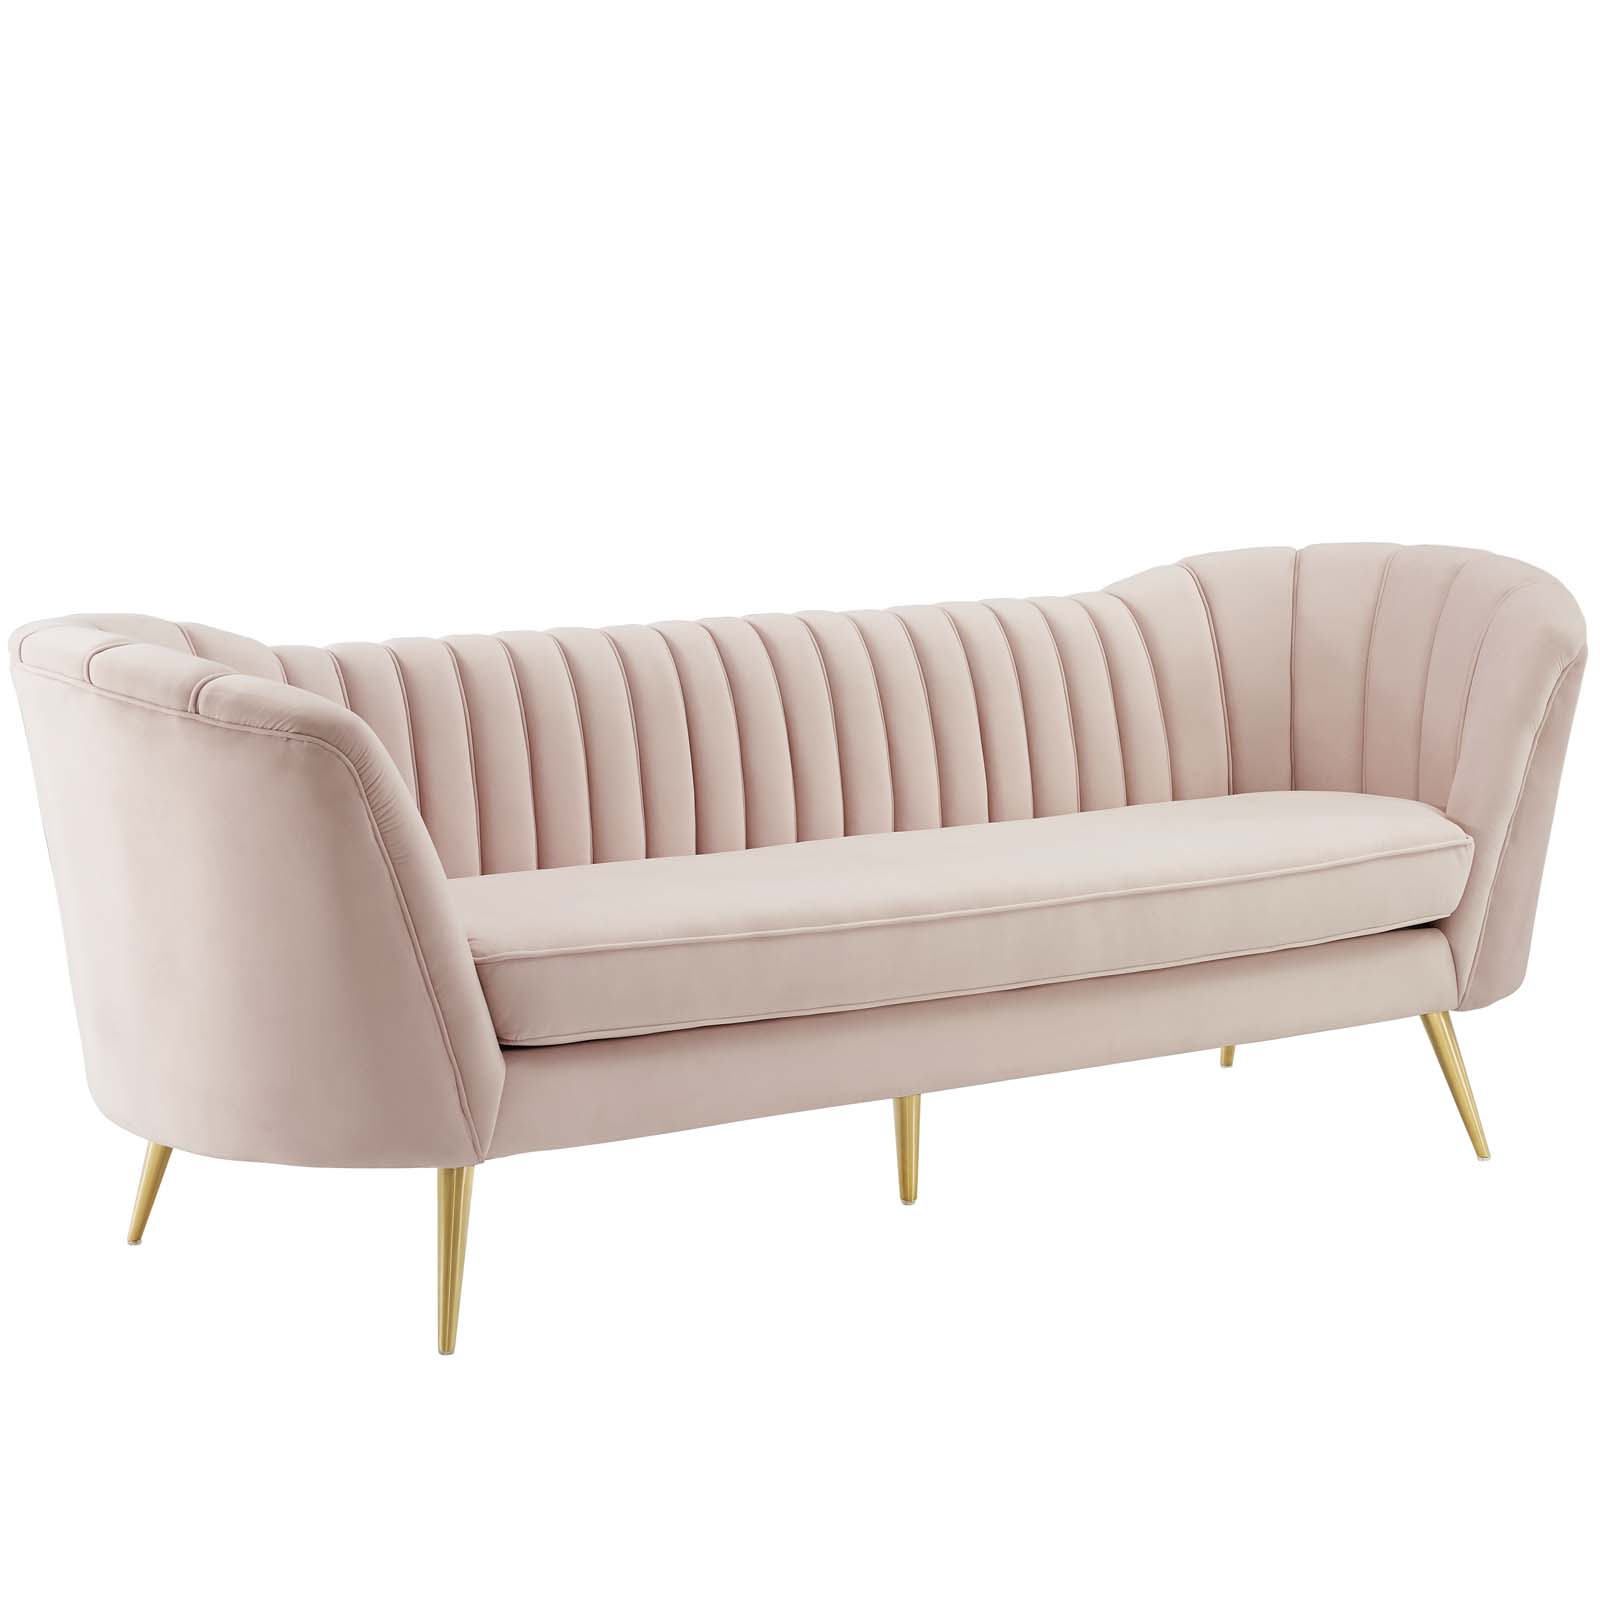 Opportunity Vertical Channel Tufted Curved Performance Velvet Sofa - image 2 of 5